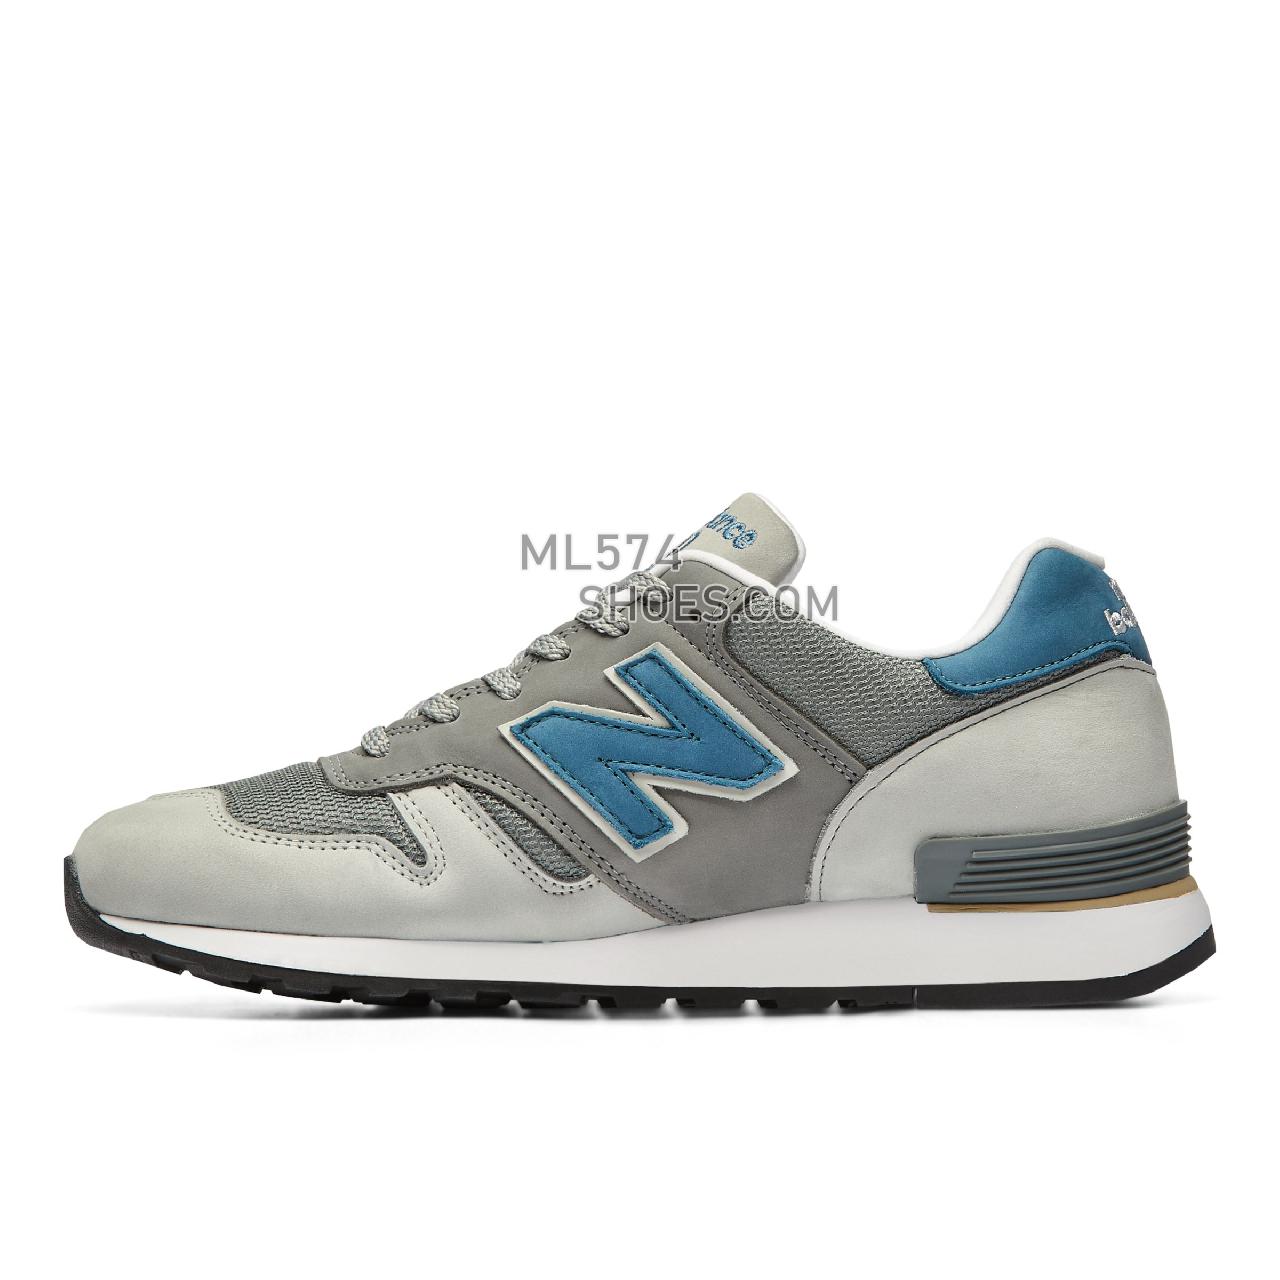 New Balance MADE in UK 670 - Men's Made in USA And UK Sneakers - Grey with Blue - M670BSG